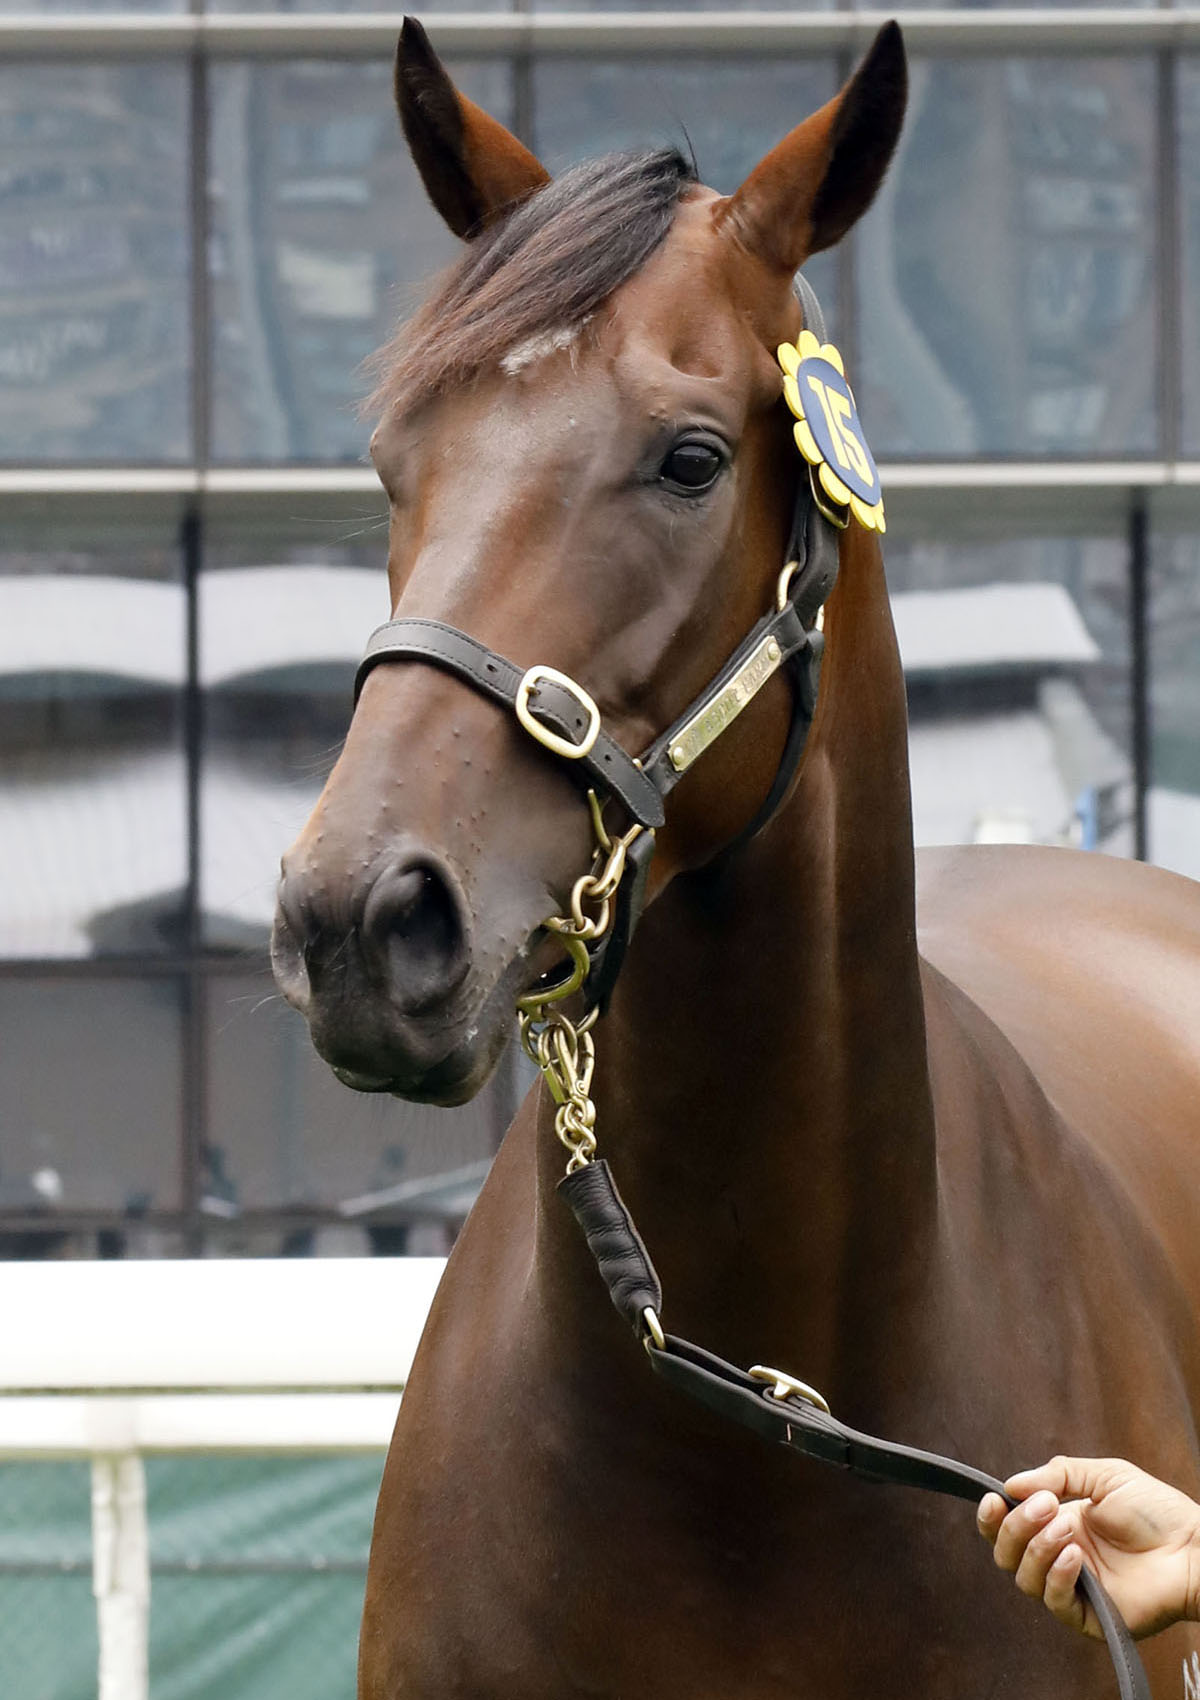 Lot 15, an Australian-bred bay gelding by Exceed And Excel.